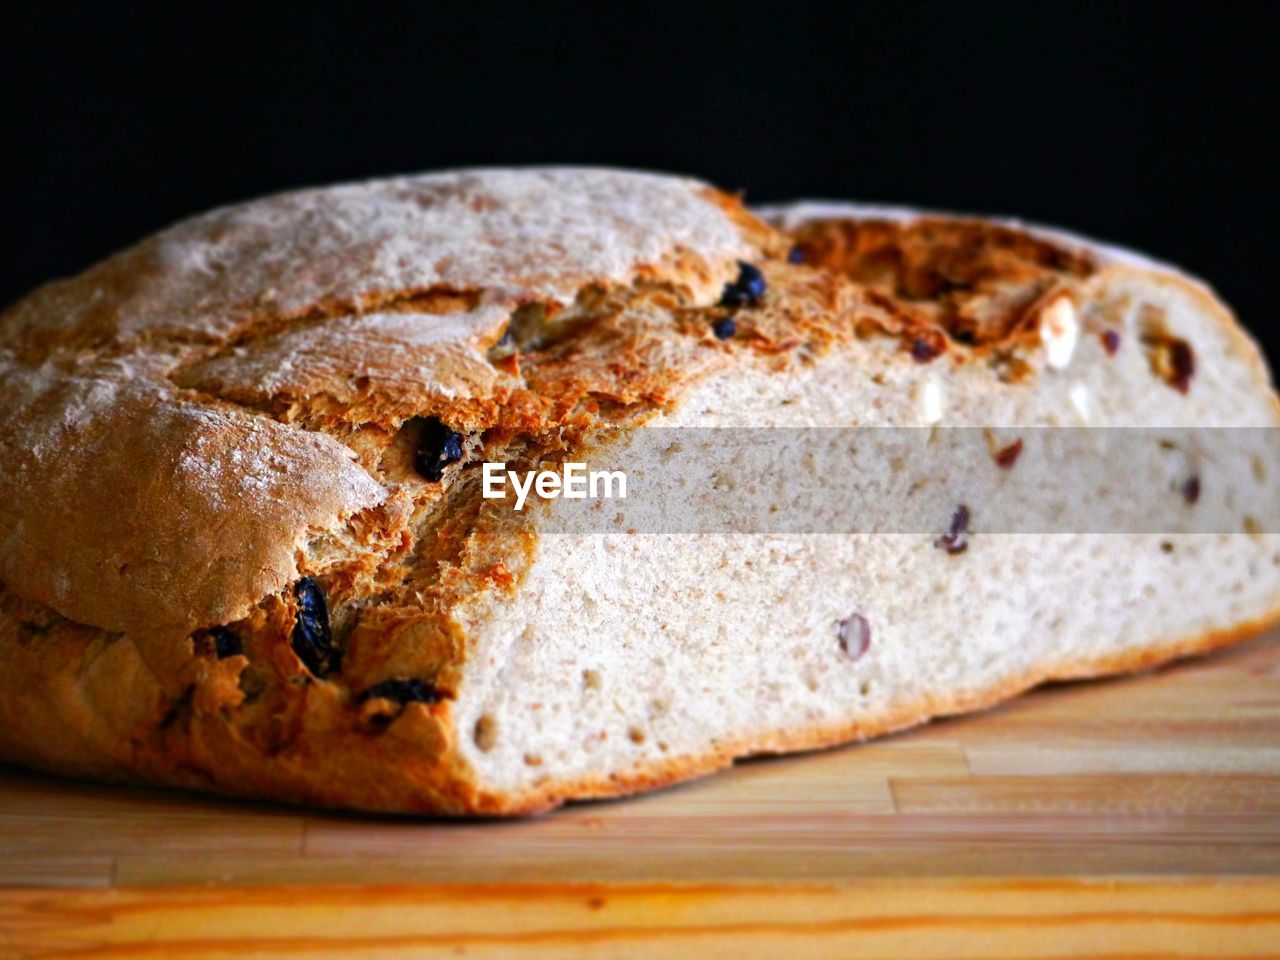 CLOSE-UP VIEW OF BREAD